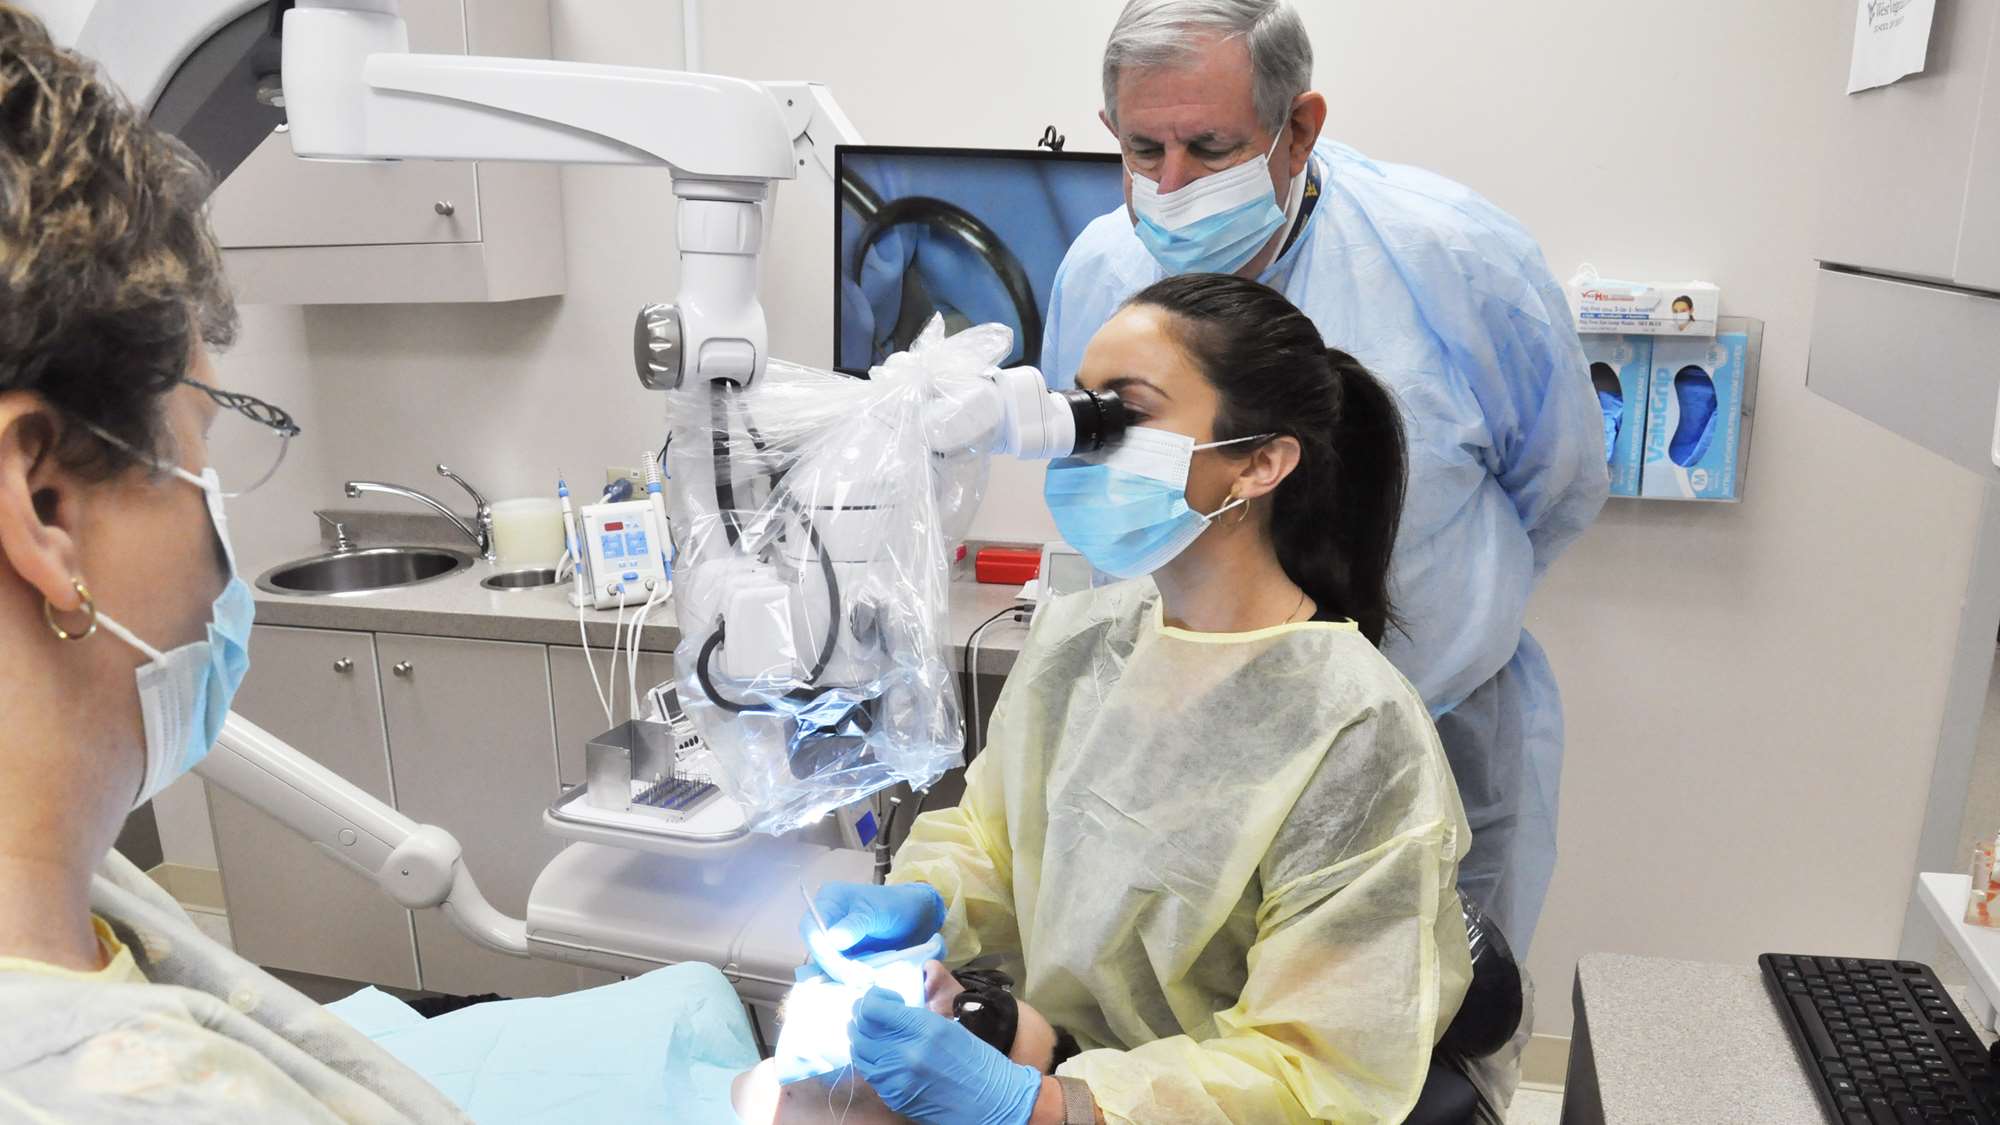 Endodontics residents treat a patient using the latest in illuminating and magnification technology.